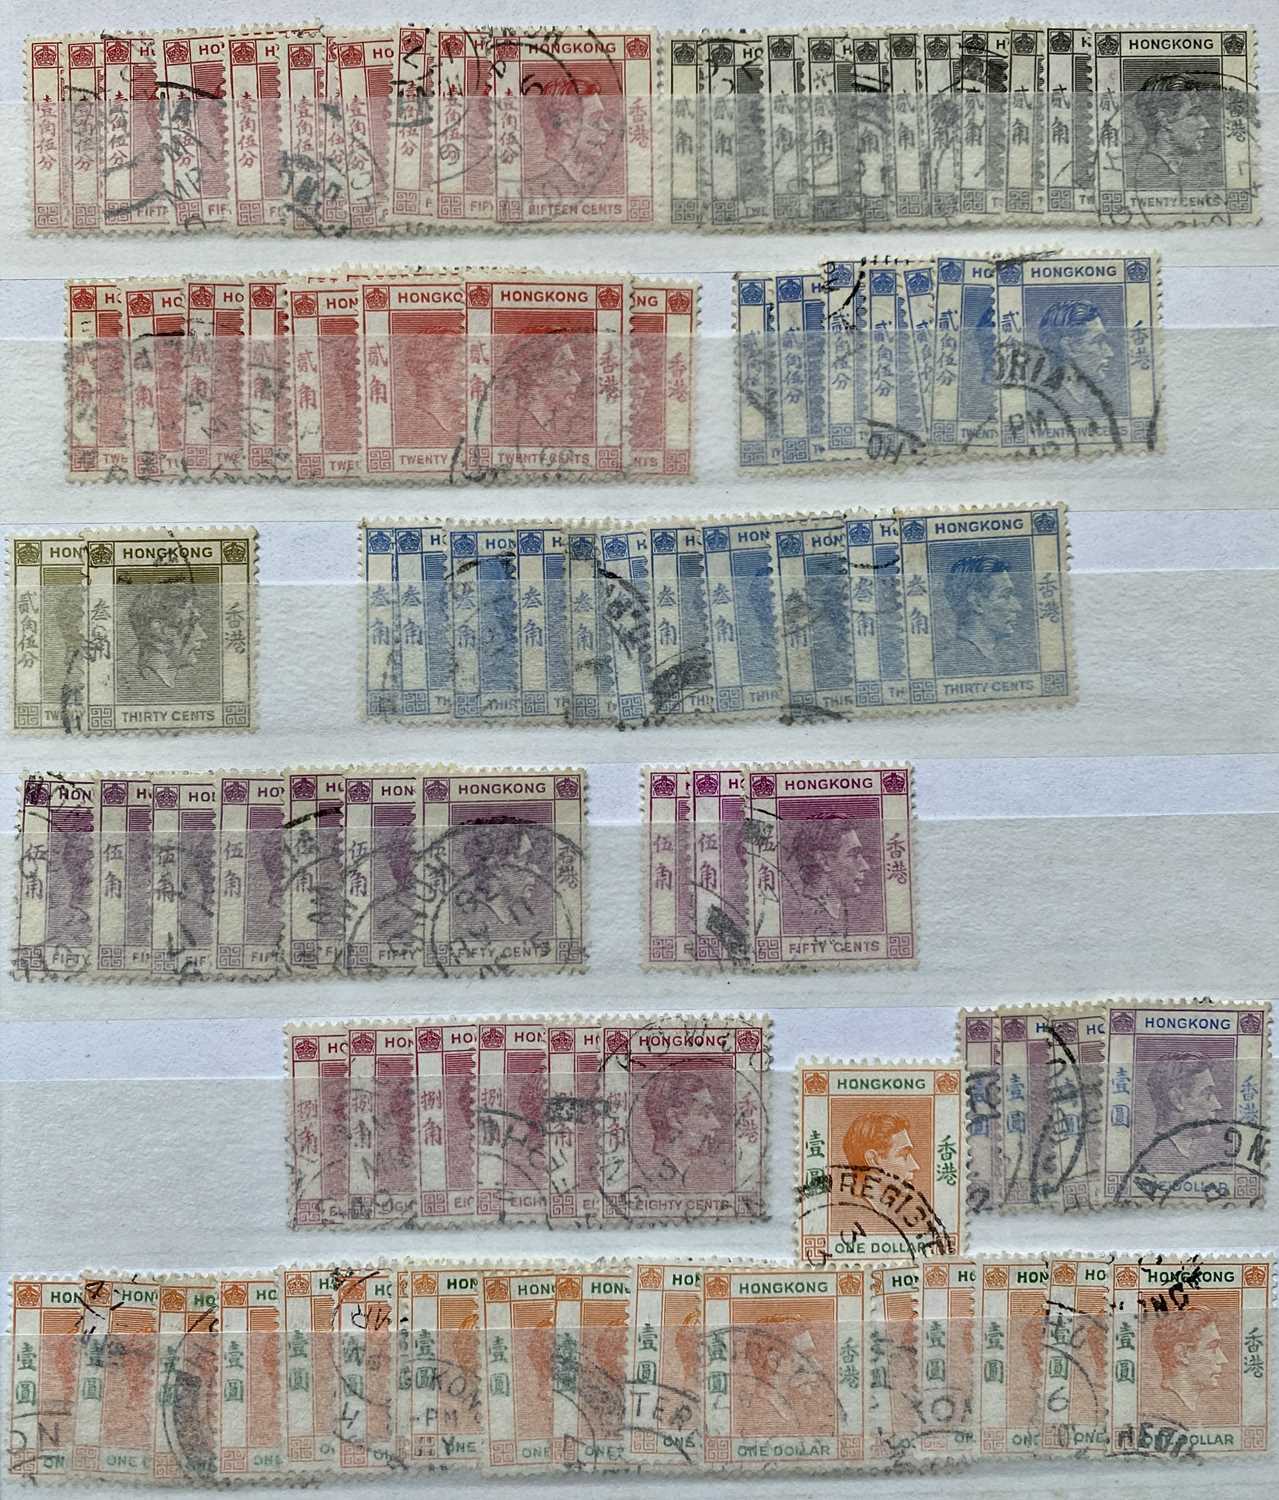 VERY GOOD HONG KONG UNMOUNTED MINT & FINE USED HIGH CAT VALUE, OVERPRINTS ETC - Image 4 of 19